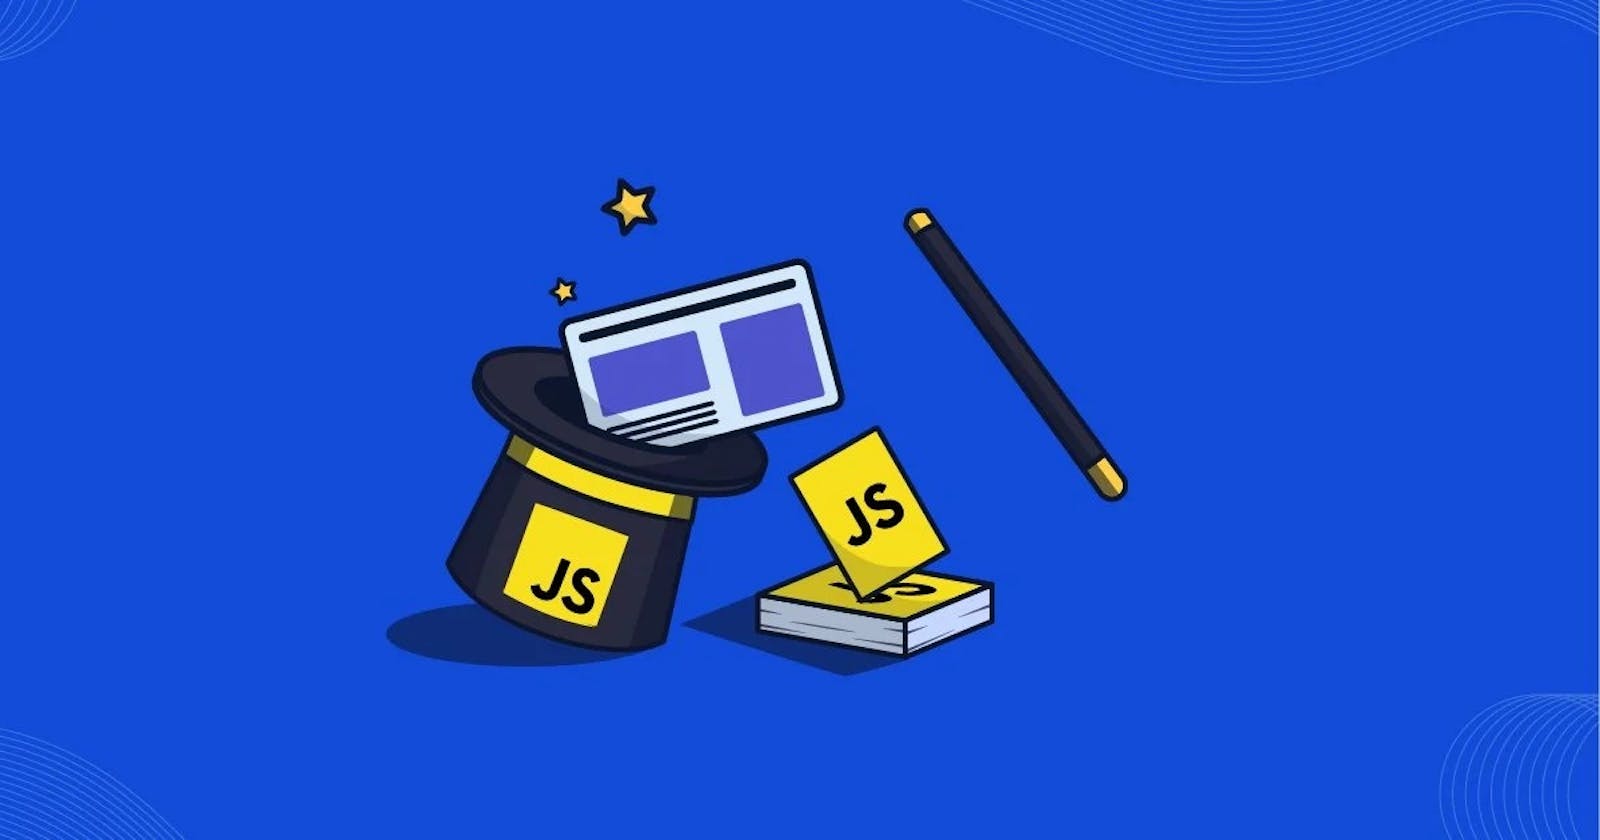 Different types of variable declarations in JavaScript - var, let and const.